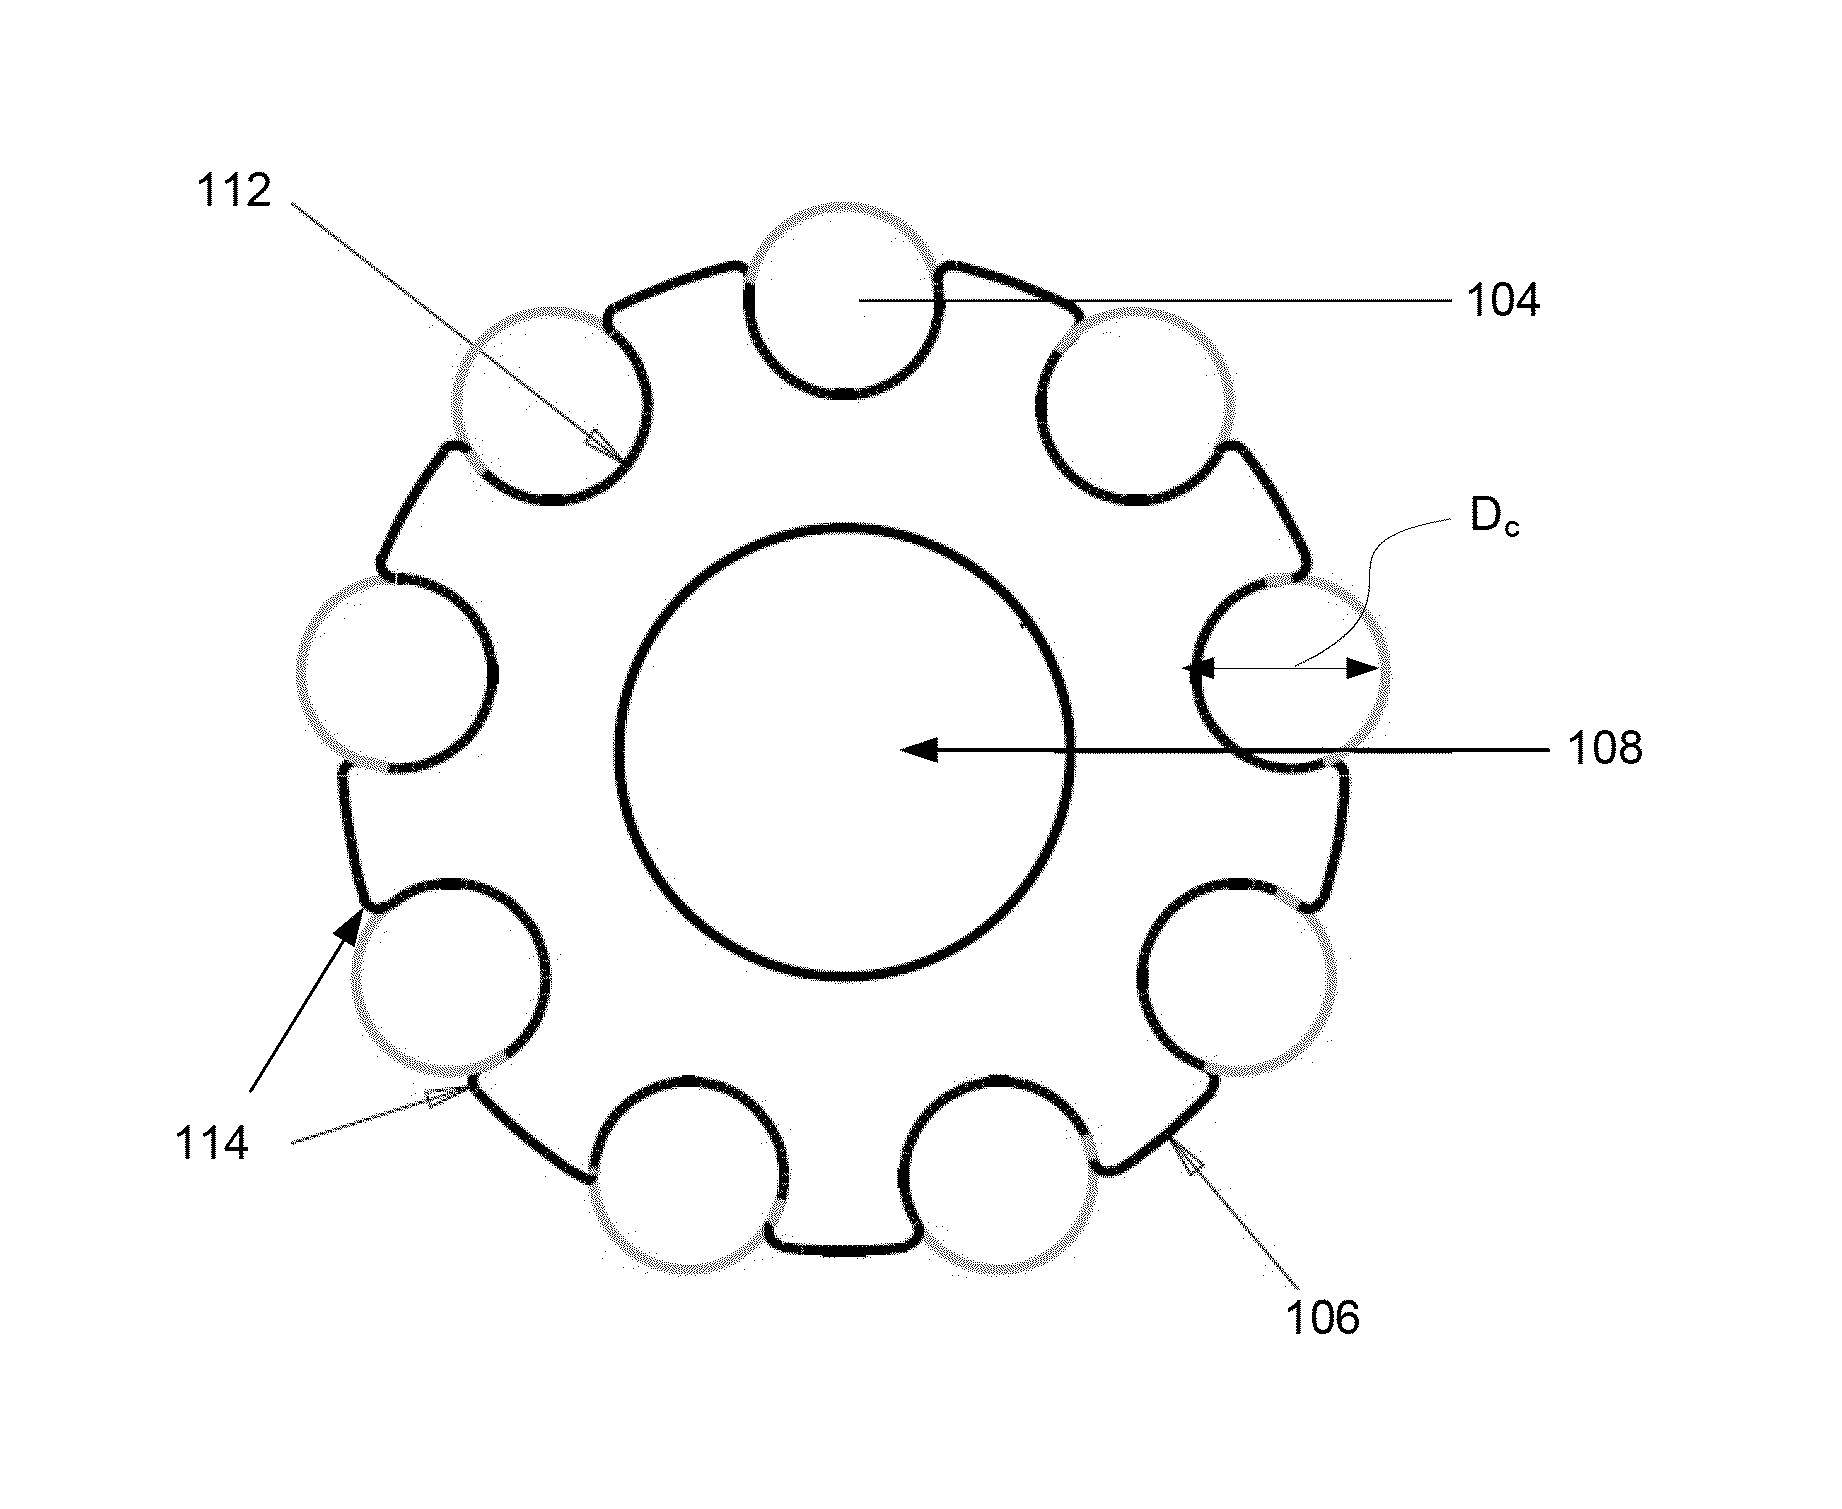 Cooling disc for bundles of current carrying cables